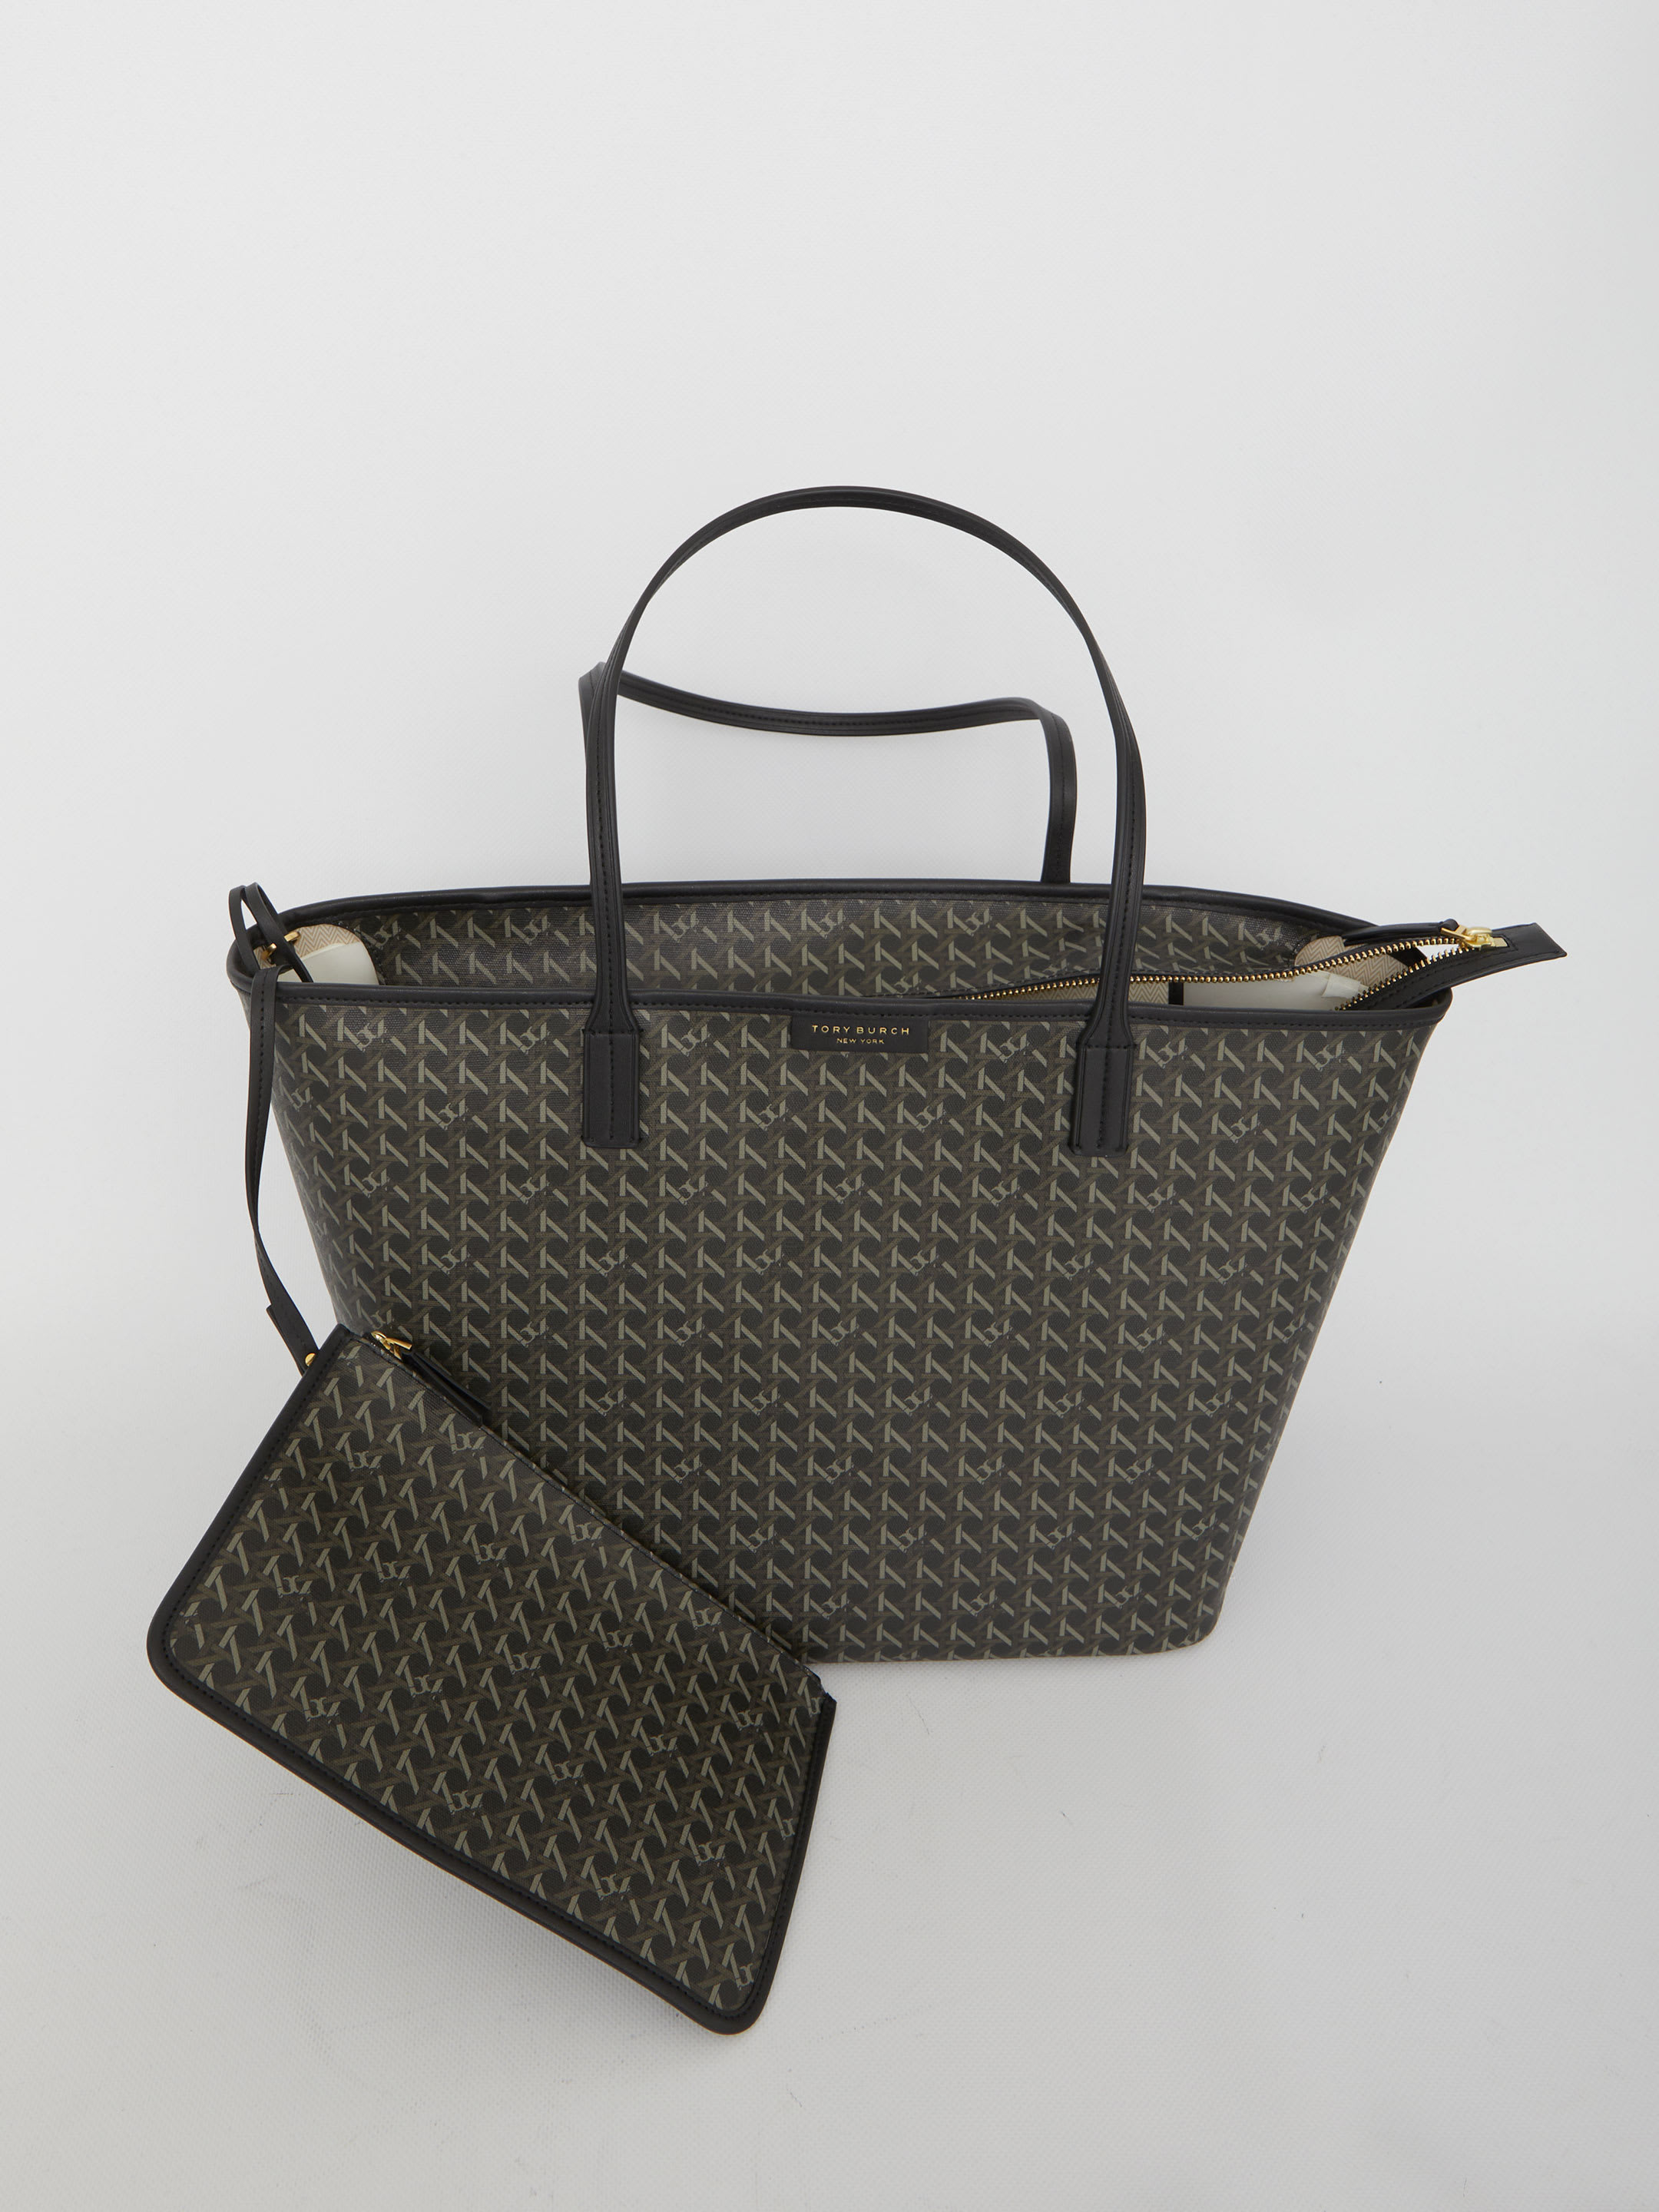 Tory Burch Ever-Ready Tote Bag